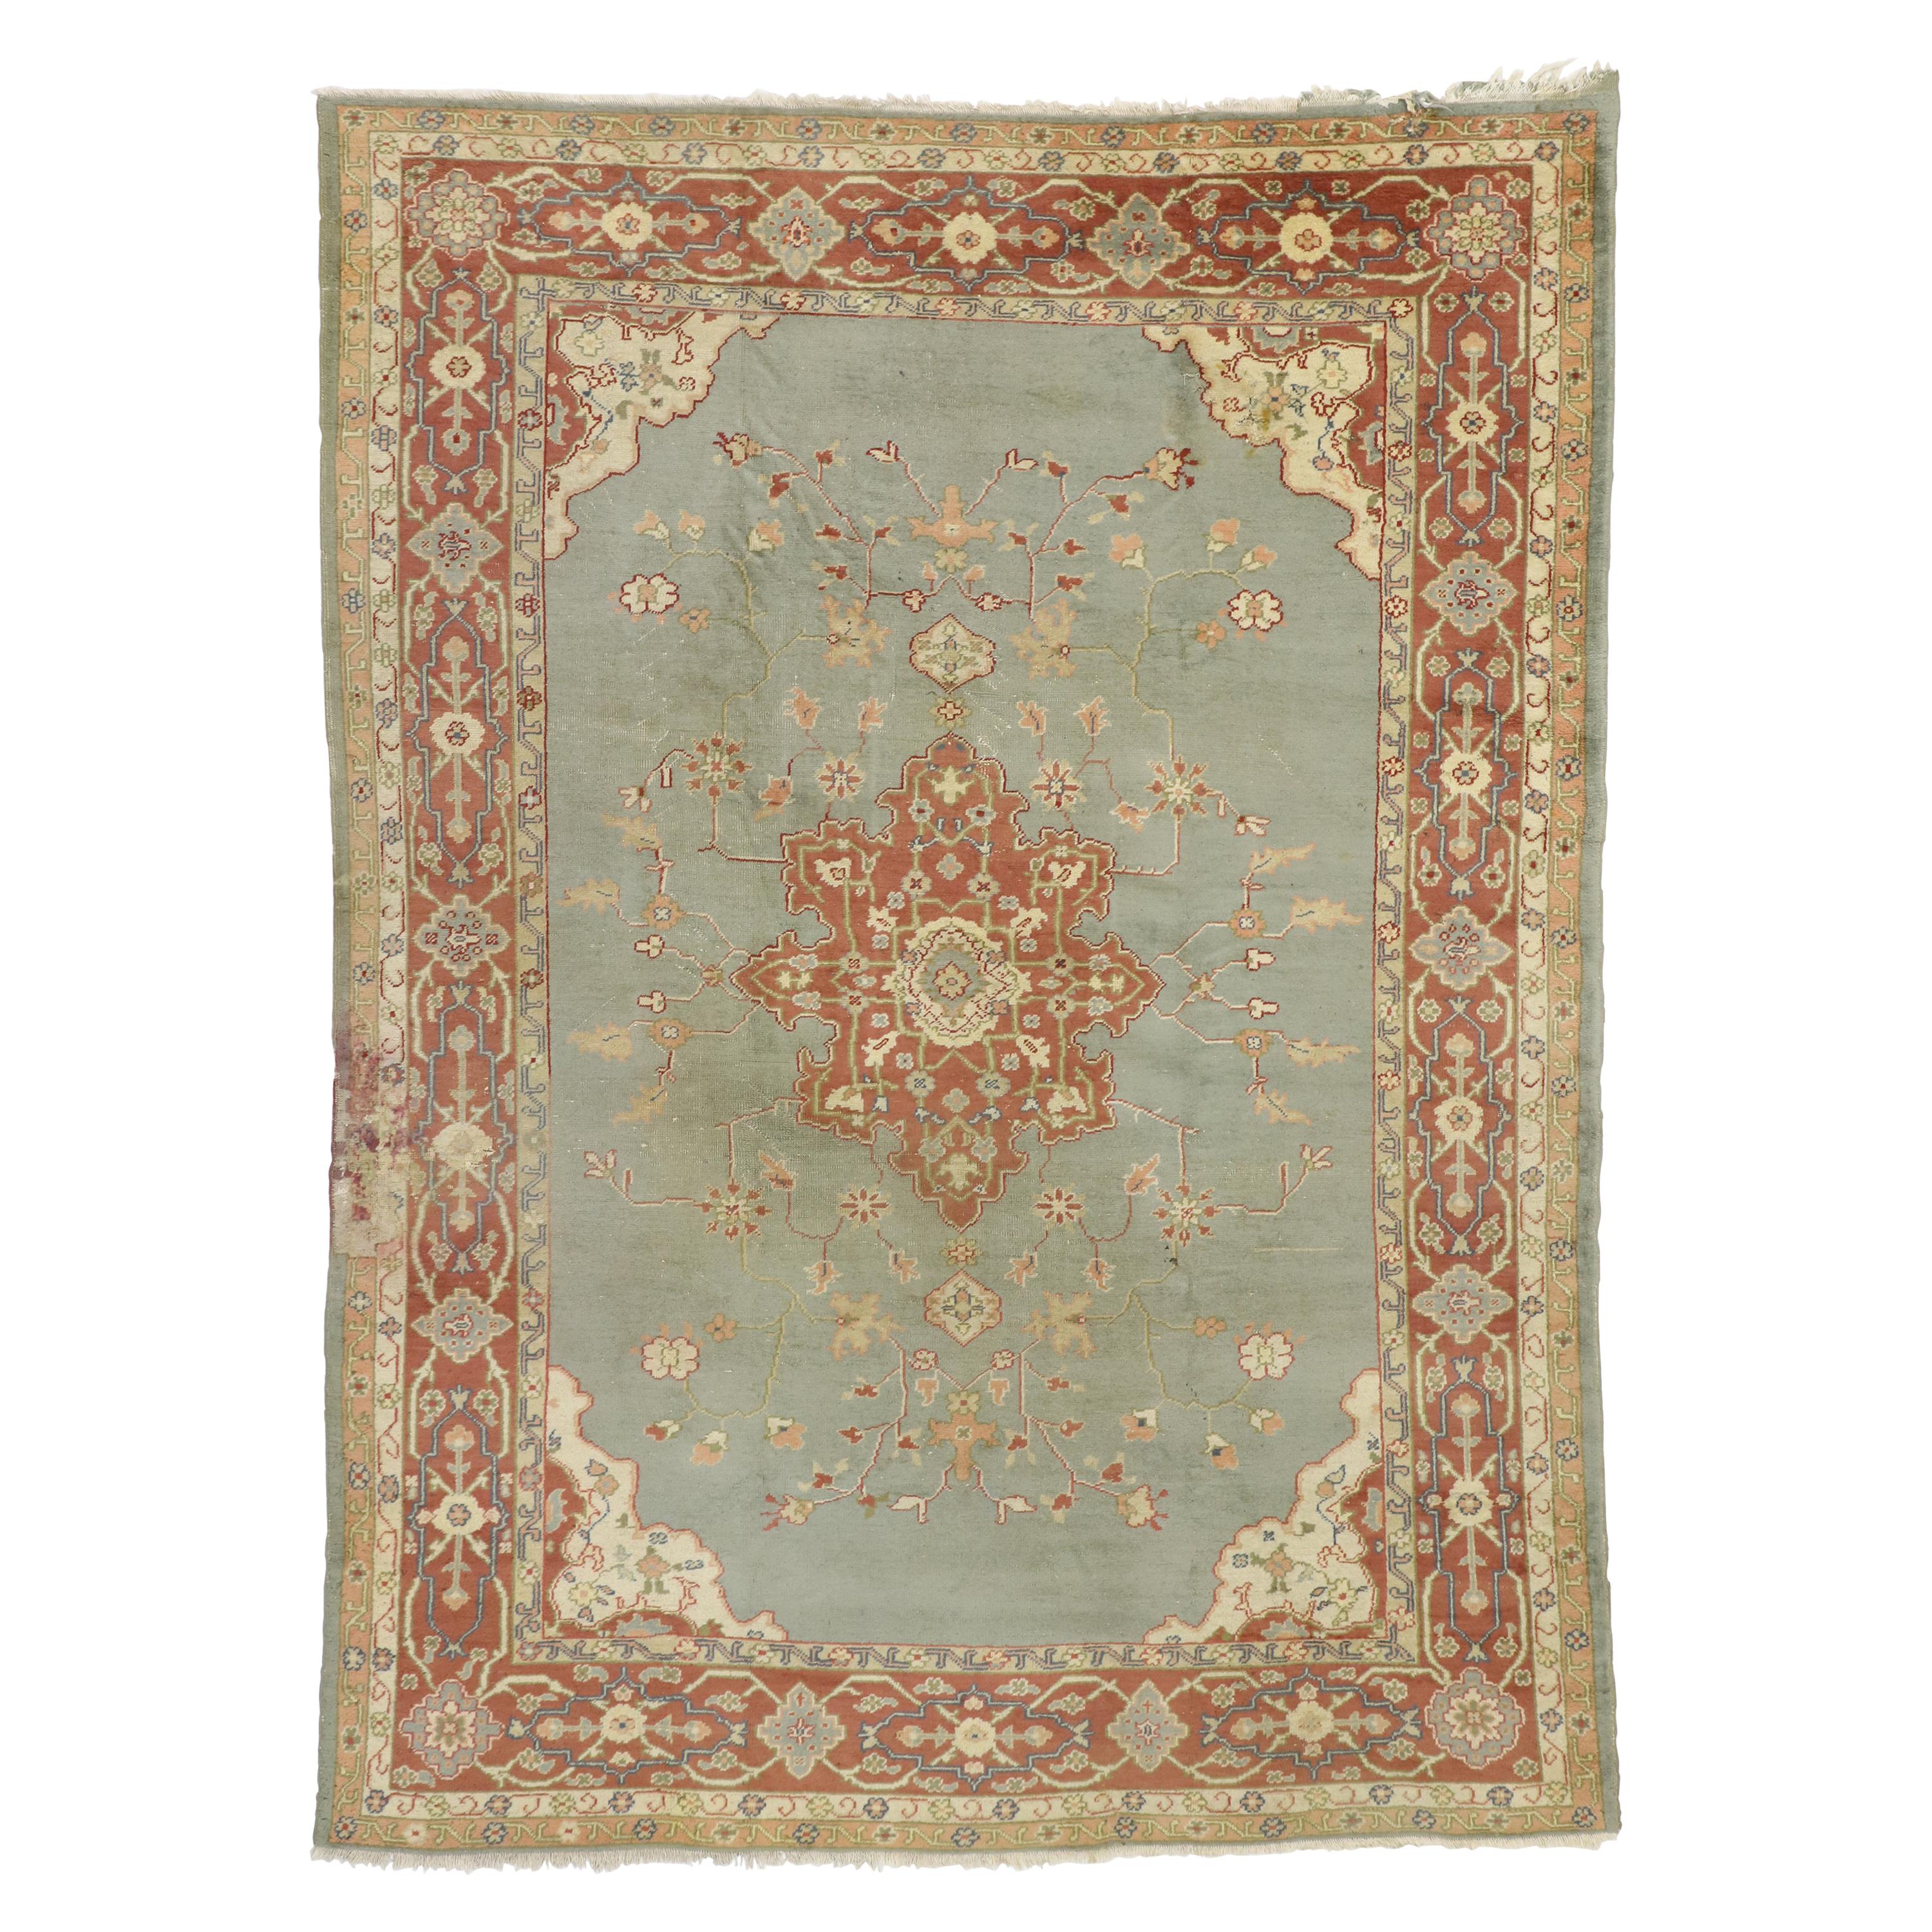 Distressed Antique Turkish Oushak Rug with Rustic Georgian Arts & Crafts Style For Sale